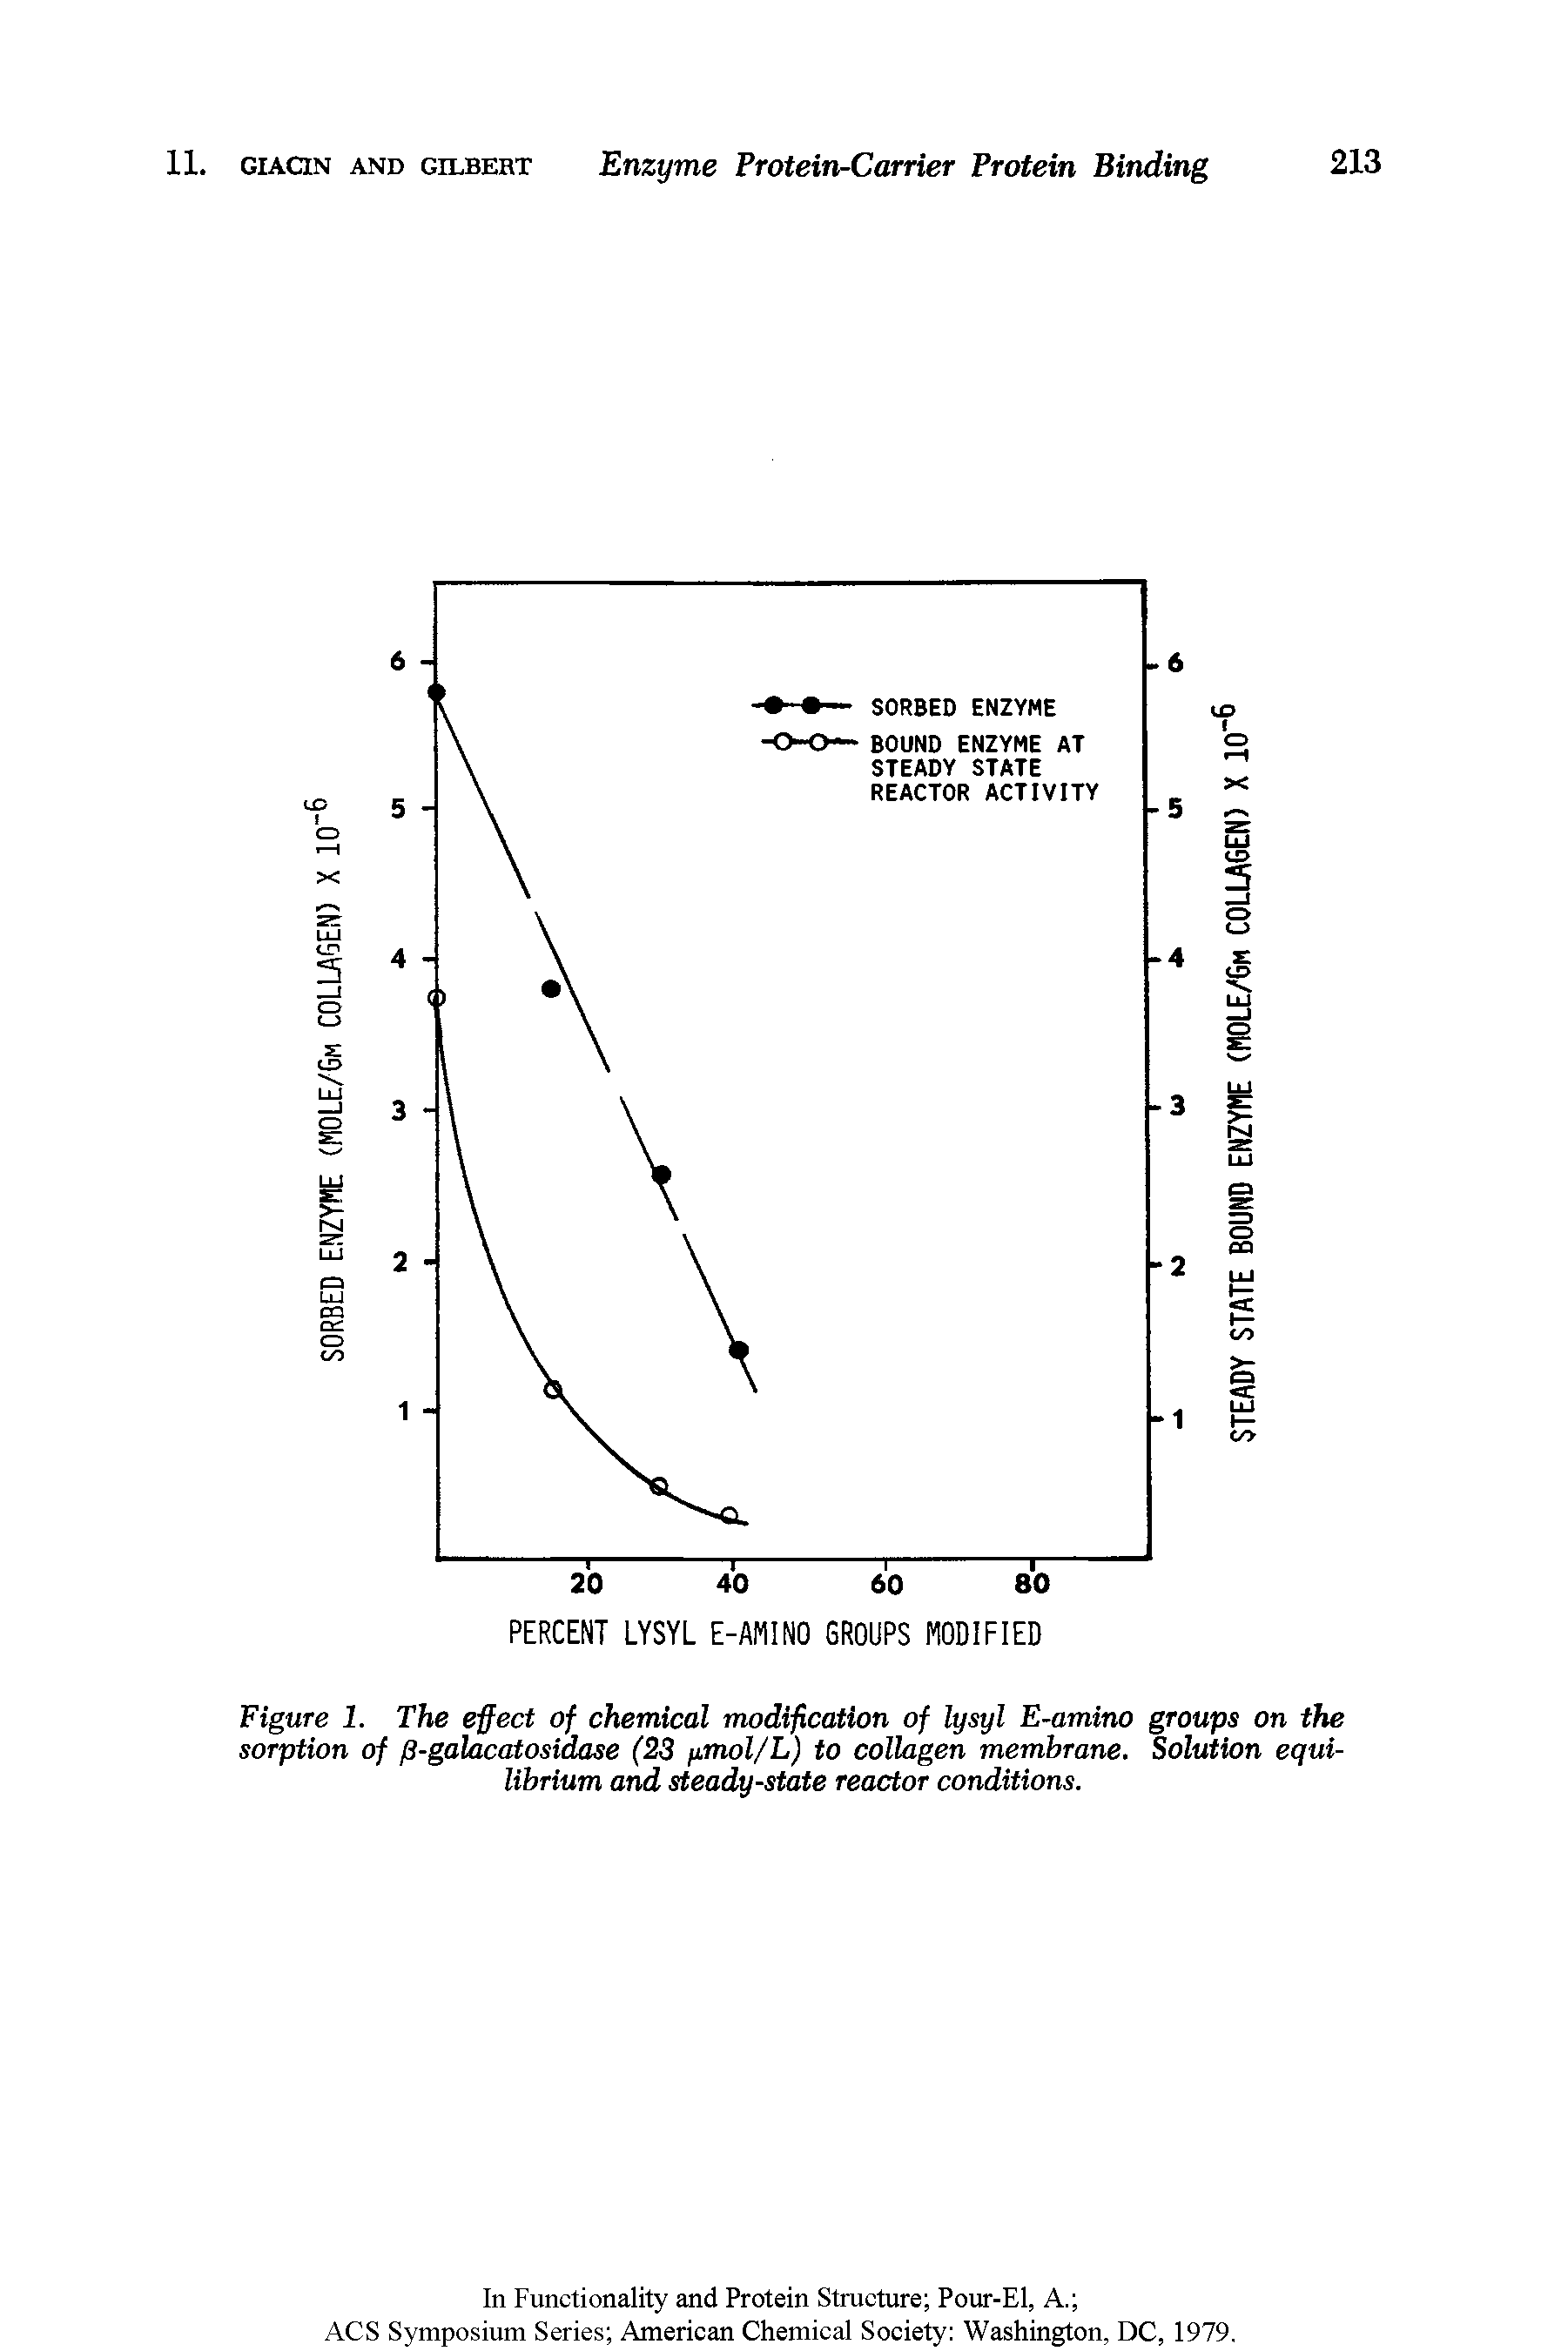 Figure 1. The effect of chemical modification of lysyl E-amino groups on the sorption of fi-galacatosidase (23 pmol/L) to collagen membrane. Solution equilibrium and steady-state reactor conditions.